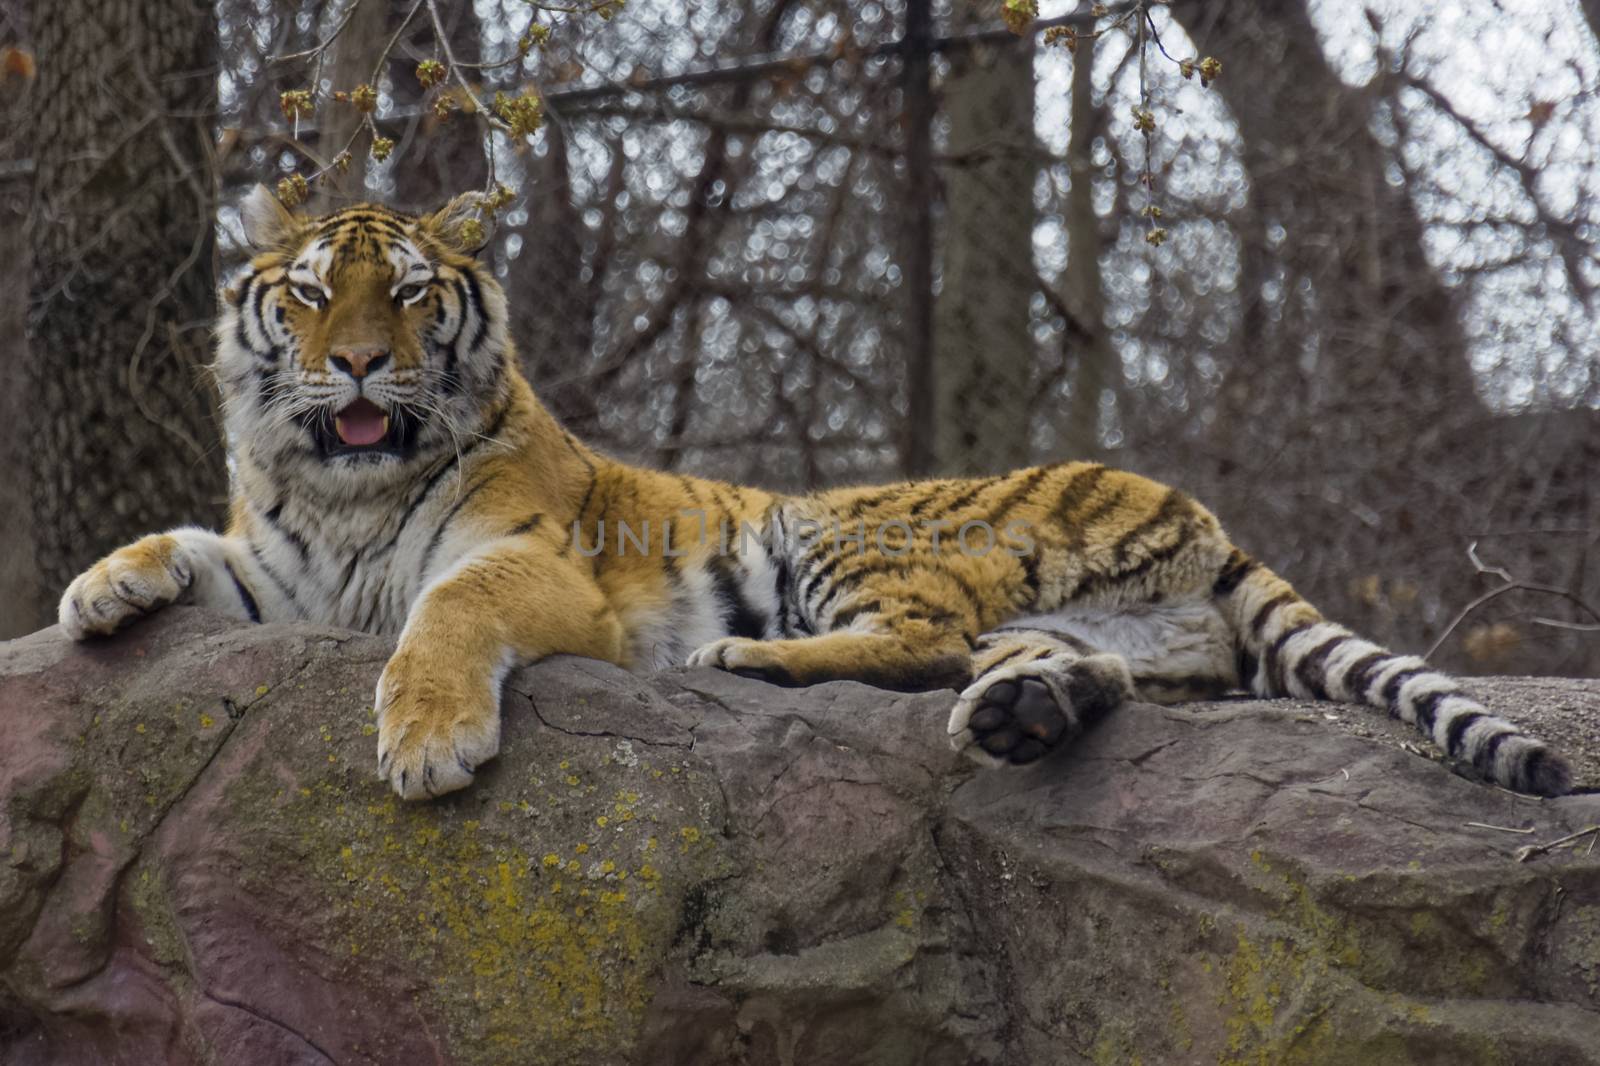 A tiger in captivity on a warm day.